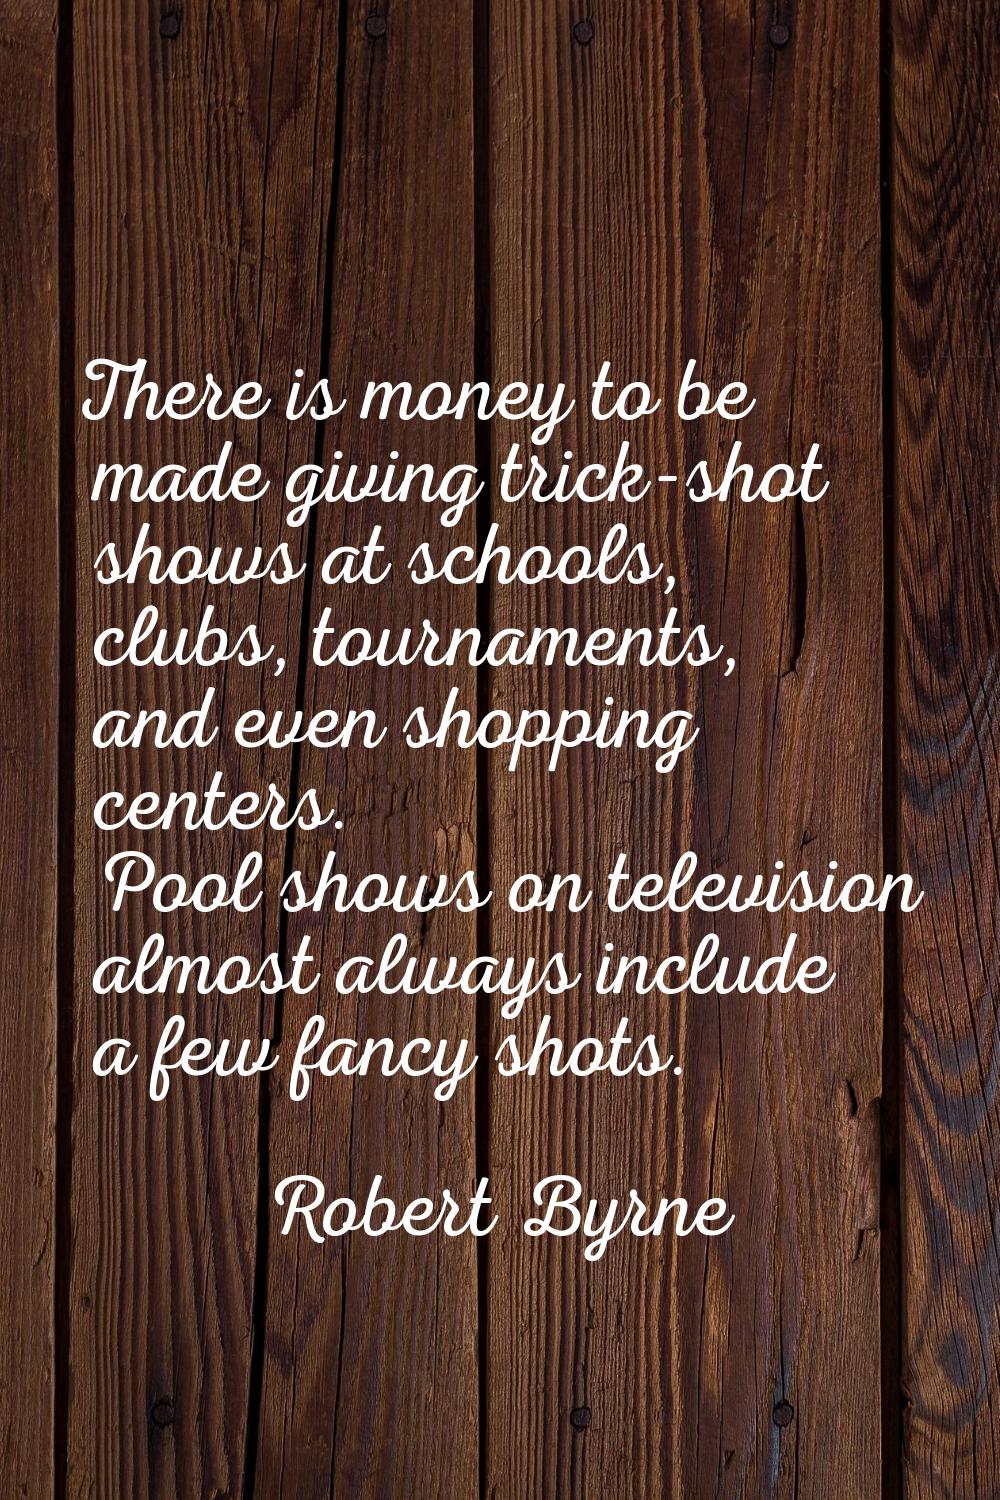 There is money to be made giving trick-shot shows at schools, clubs, tournaments, and even shopping